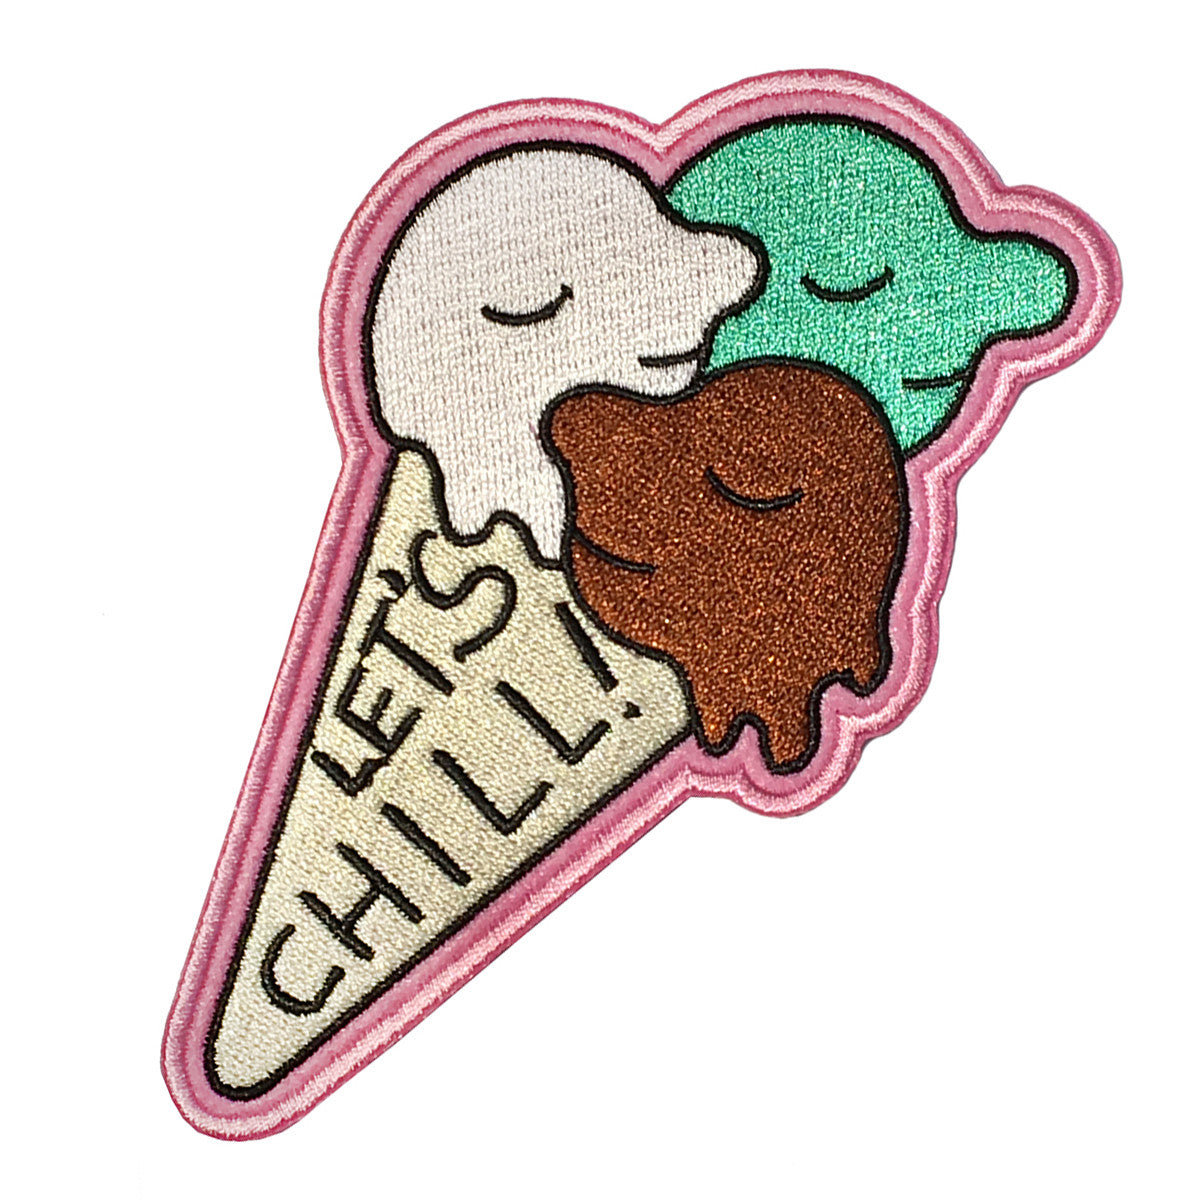 Let's Chill Patch